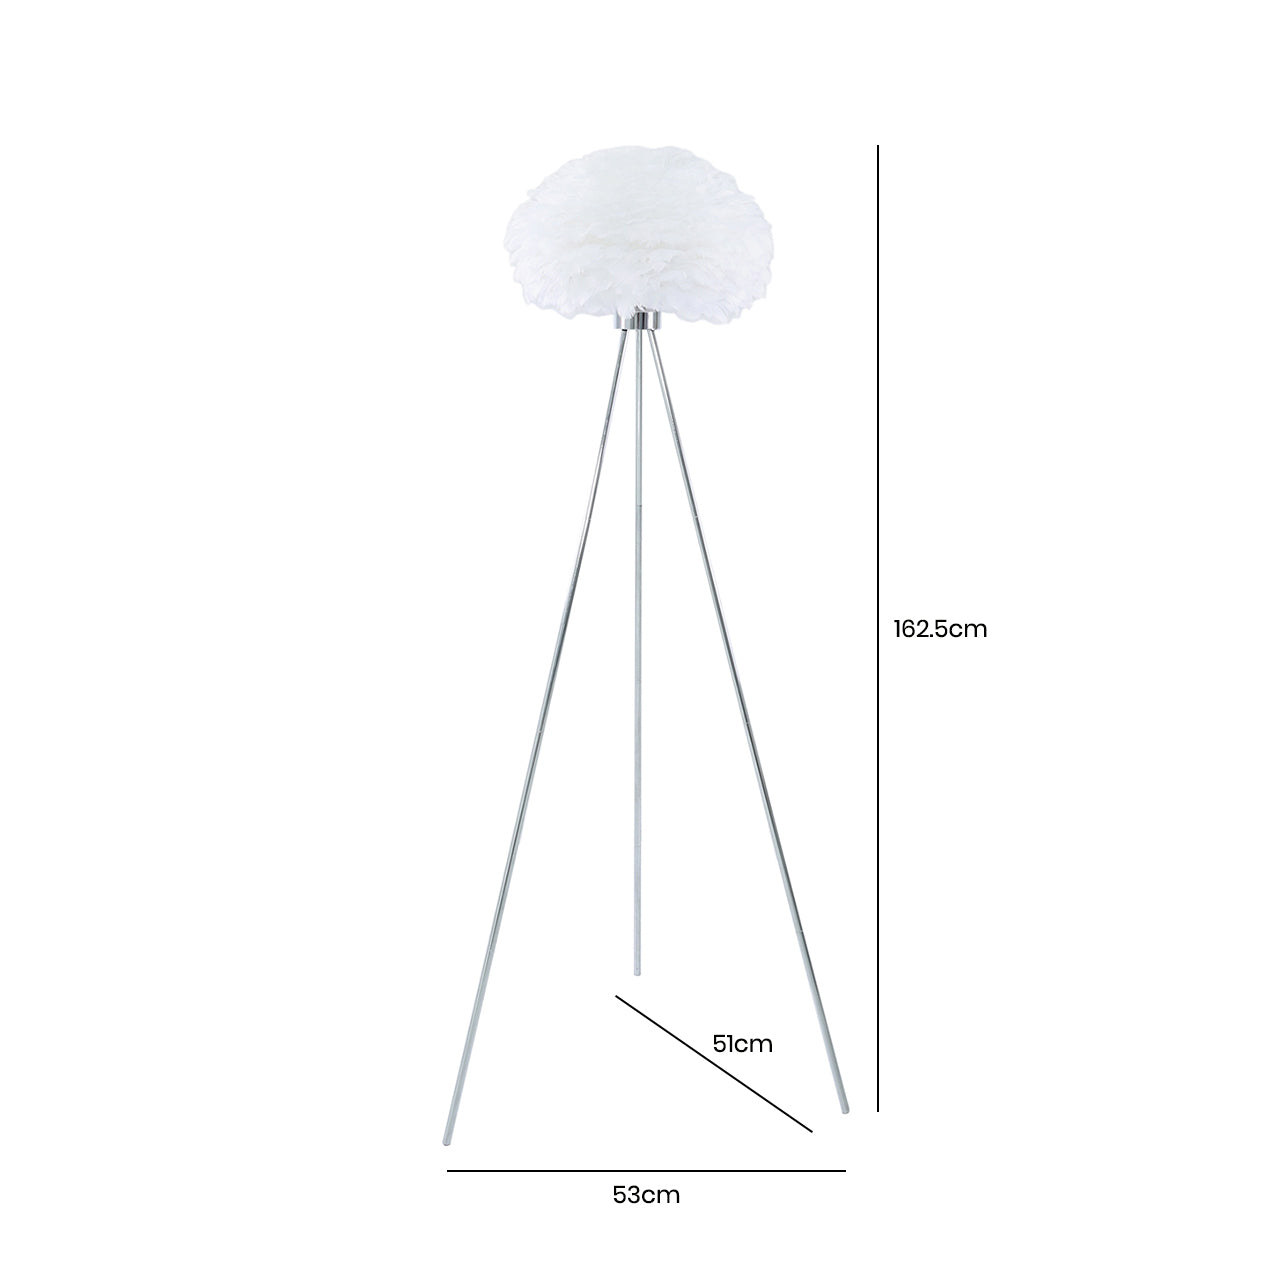 Chrome Tripod Floor Lamp with White Feather Shade - 162.5cm